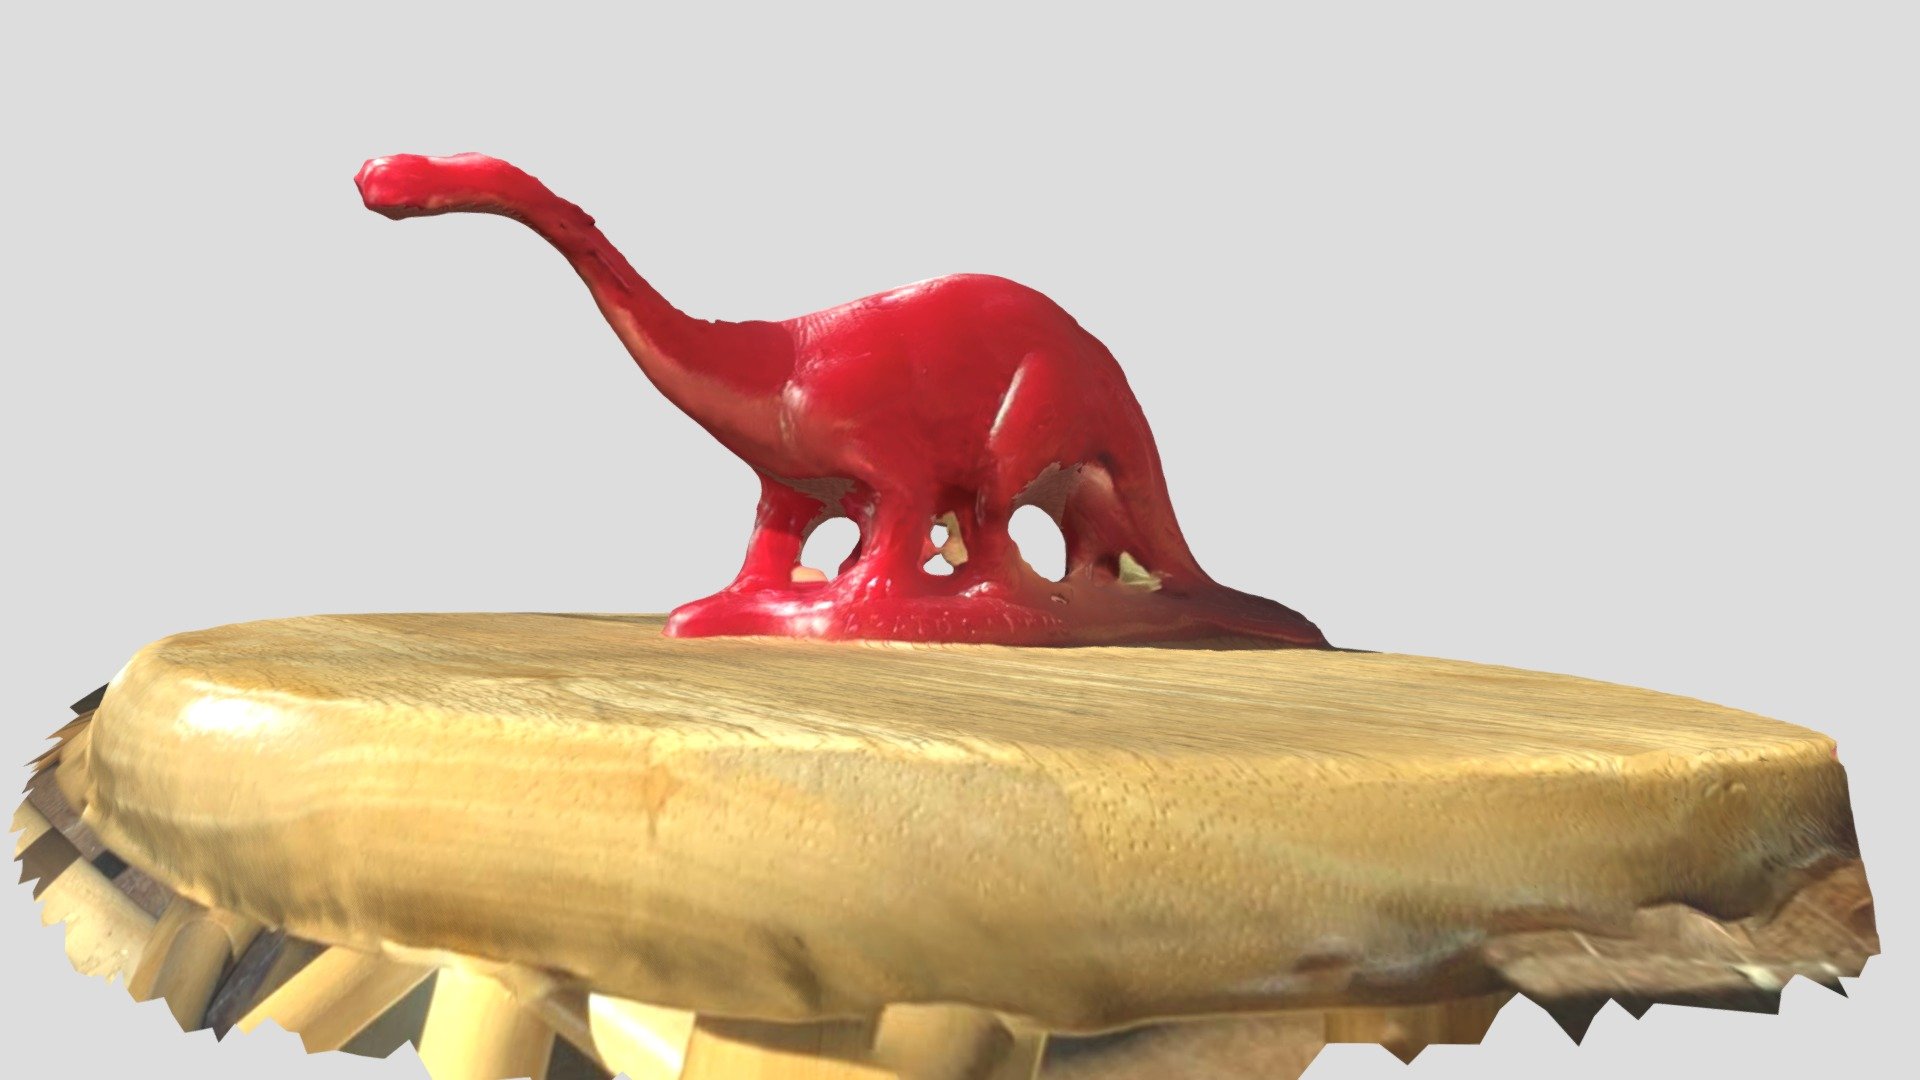 This Apatosaurus figurine was captured with an iPad Pro 2 and the TRNIO app on January 17, 2021 3d model